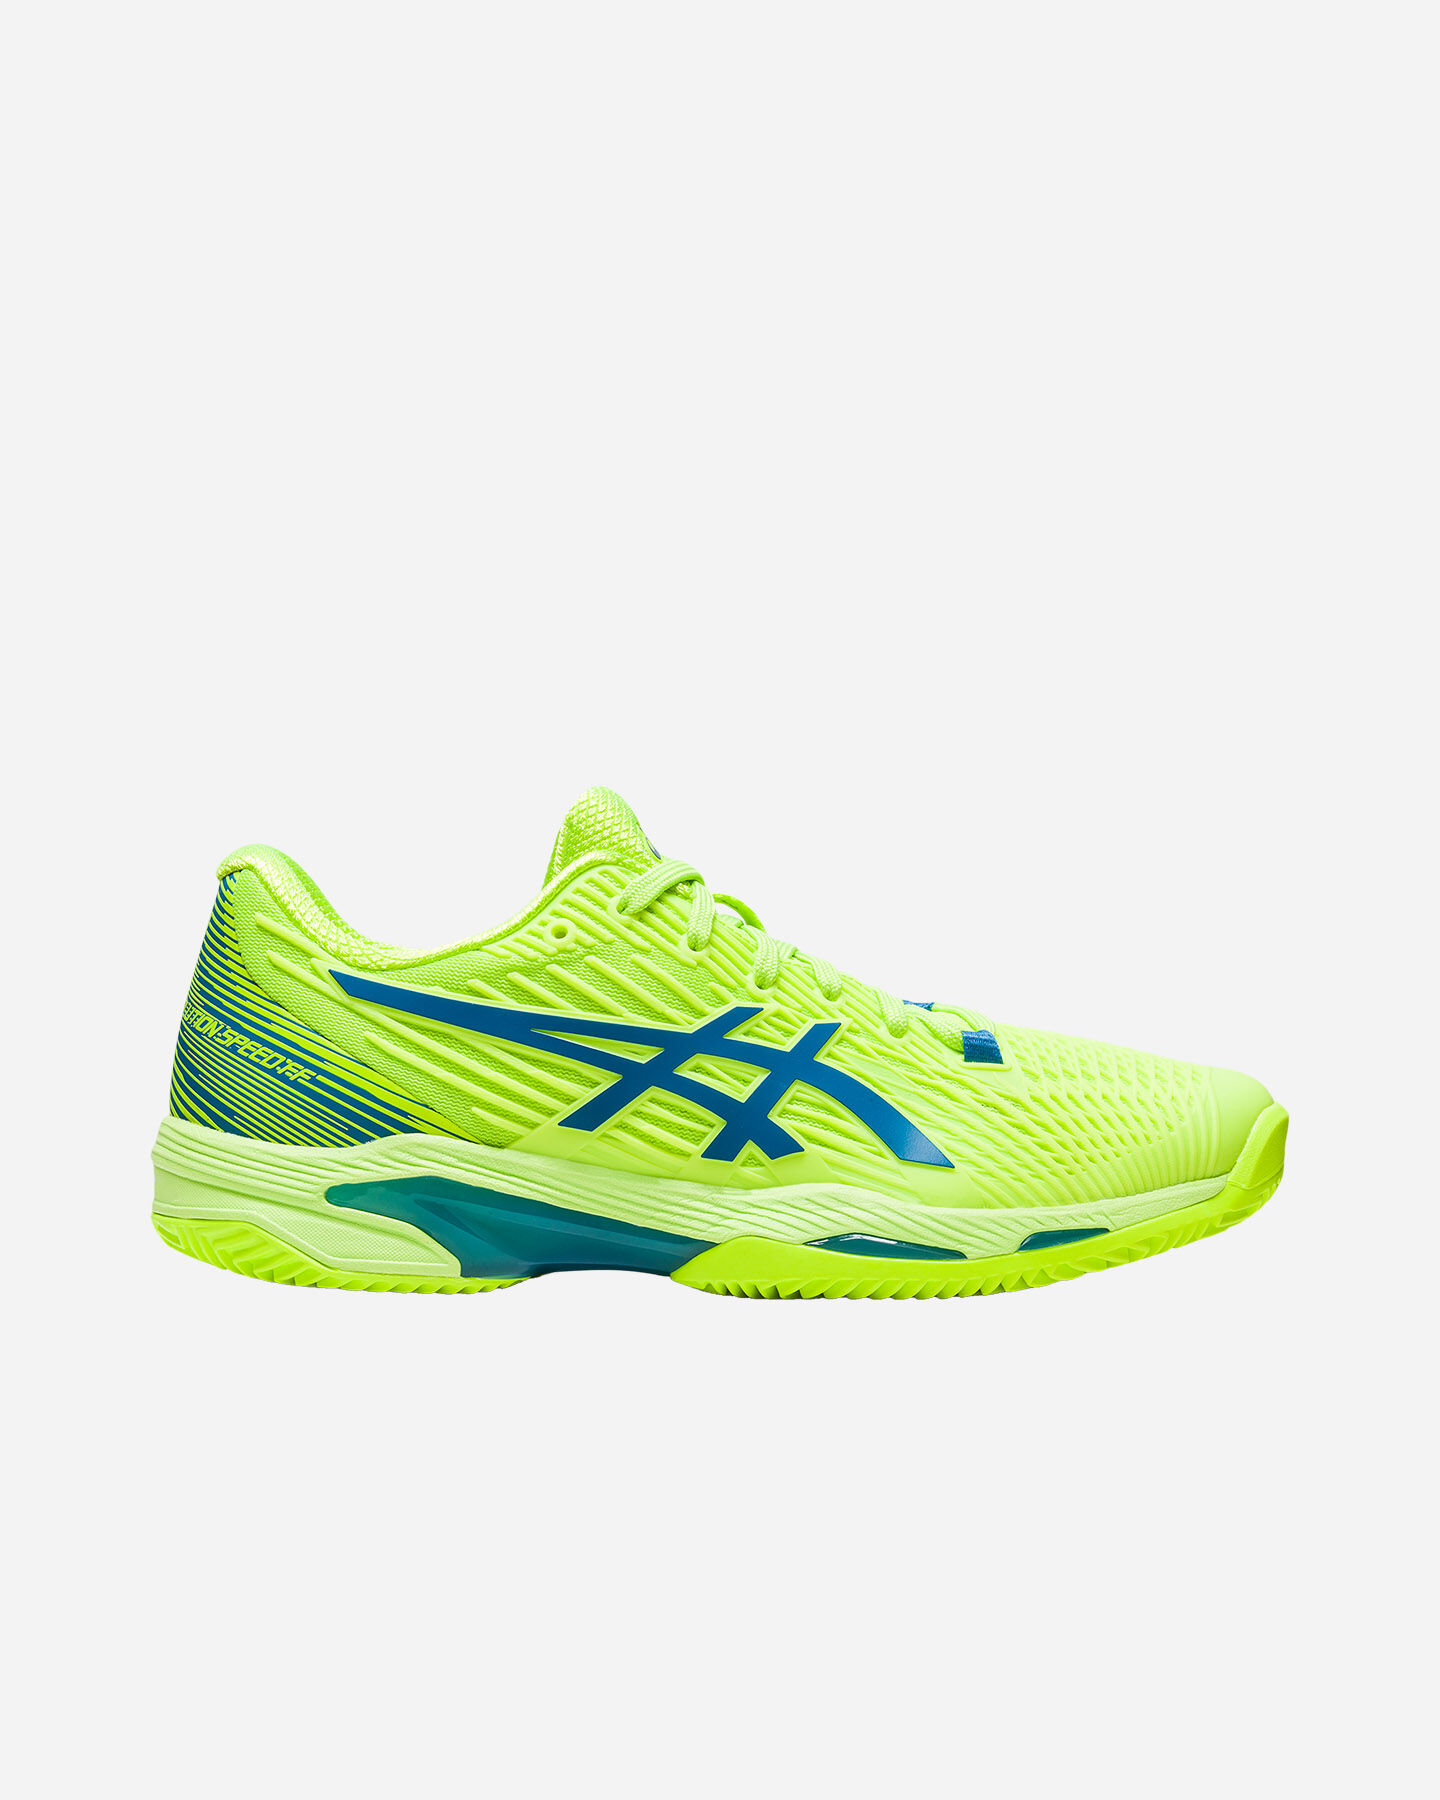  Scarpe tennis ASICS SOLUTION SPEED FF 2 CLAY W S5526077|300|5 scatto 0